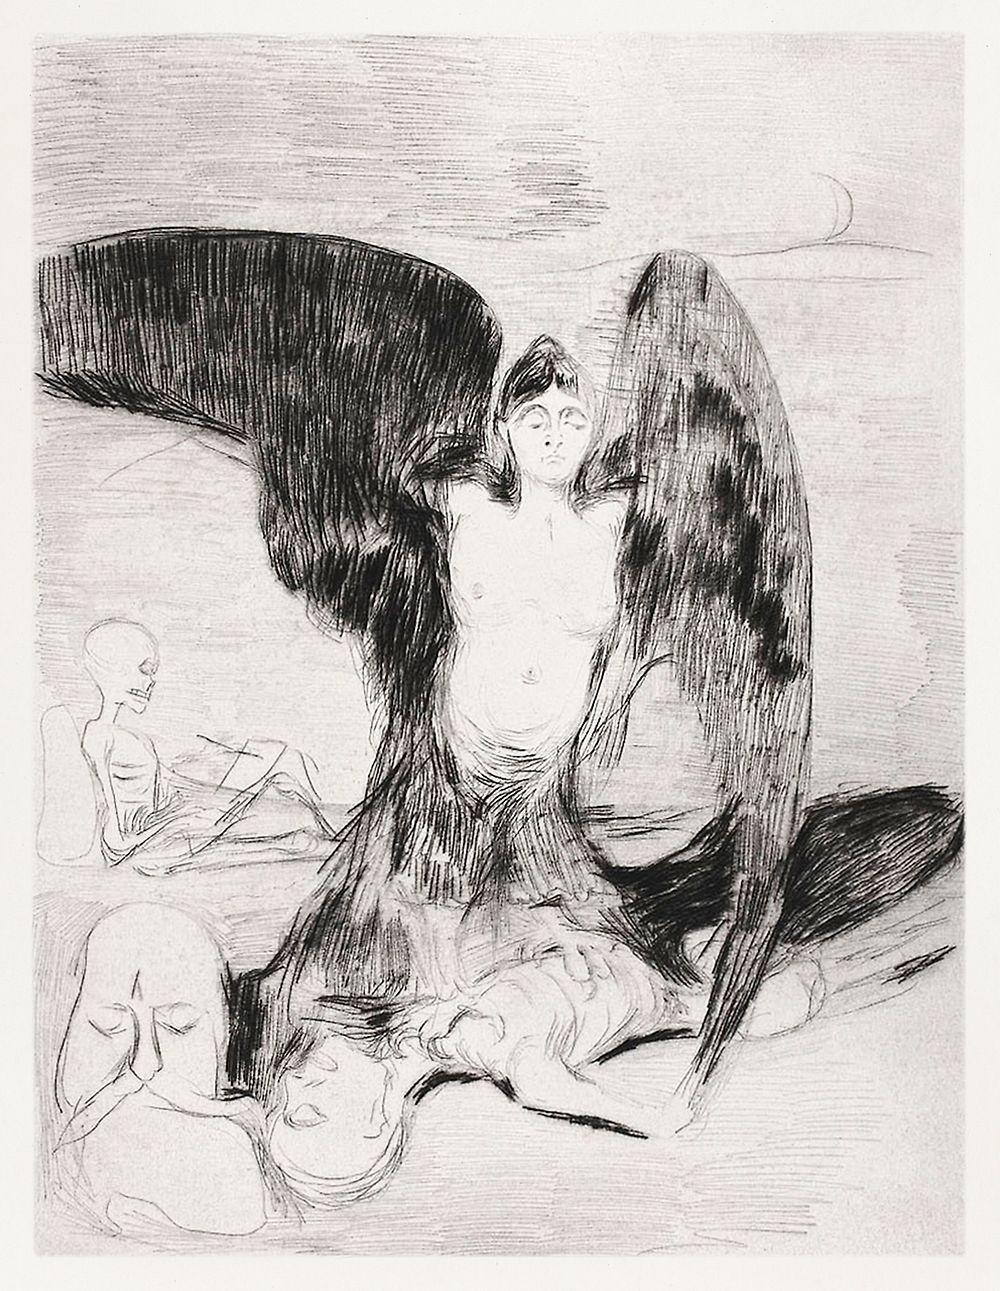 Harpy (1894) by Edvard Munch. Original from The Art Institute of Chicago. Digitally enhanced by rawpixel.